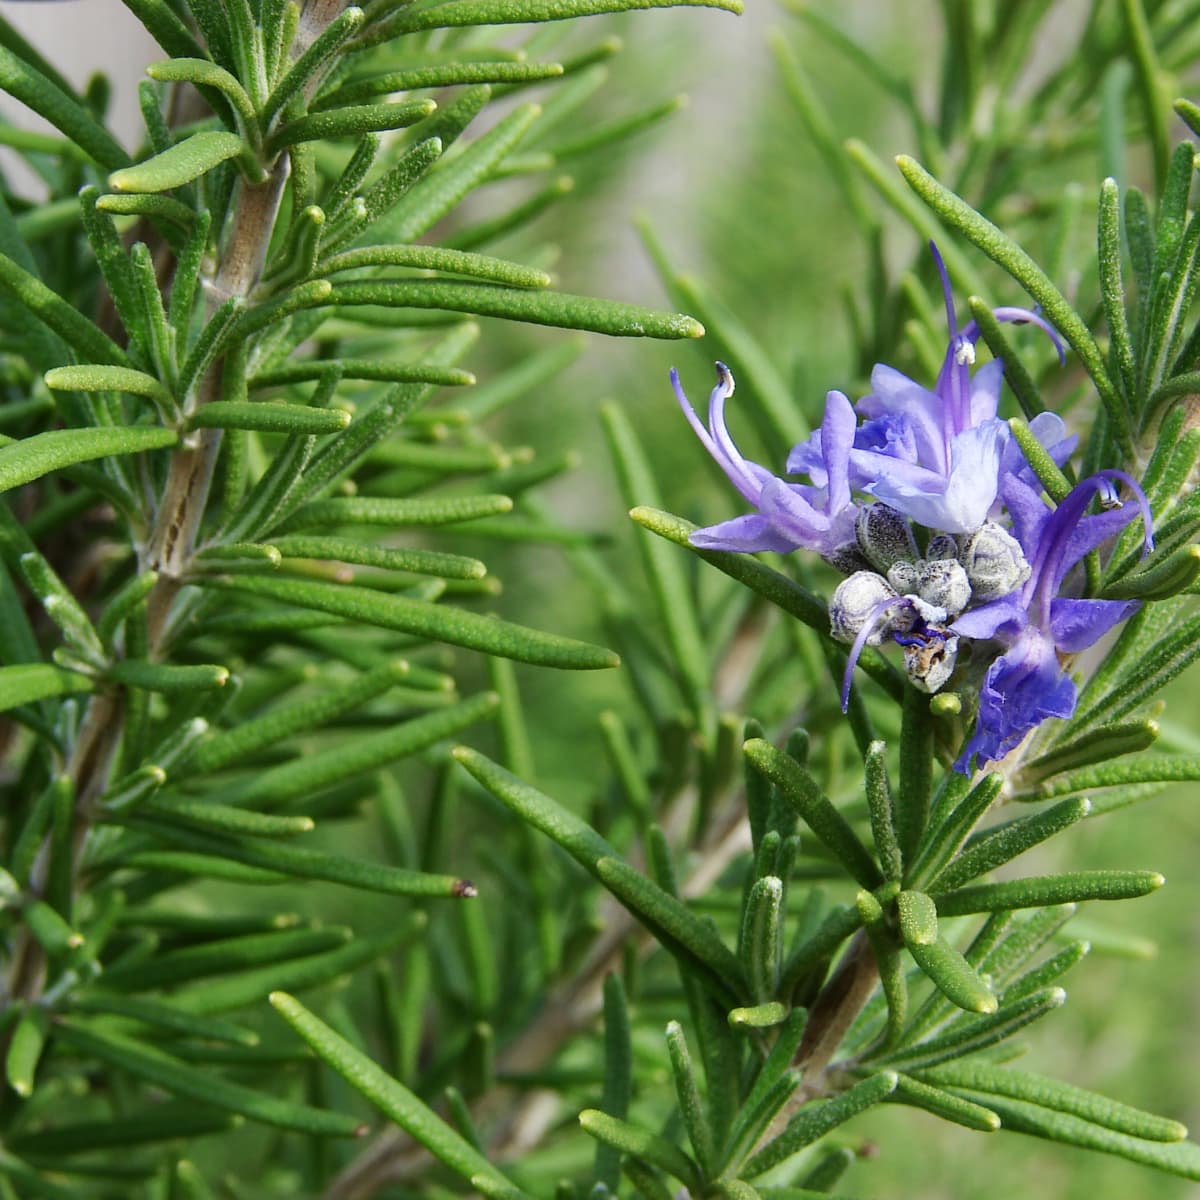 Rosemary Herb, Rosemary Tea, Rosemary Essential Oil - Nutritional And Health  Benefits - HubPages